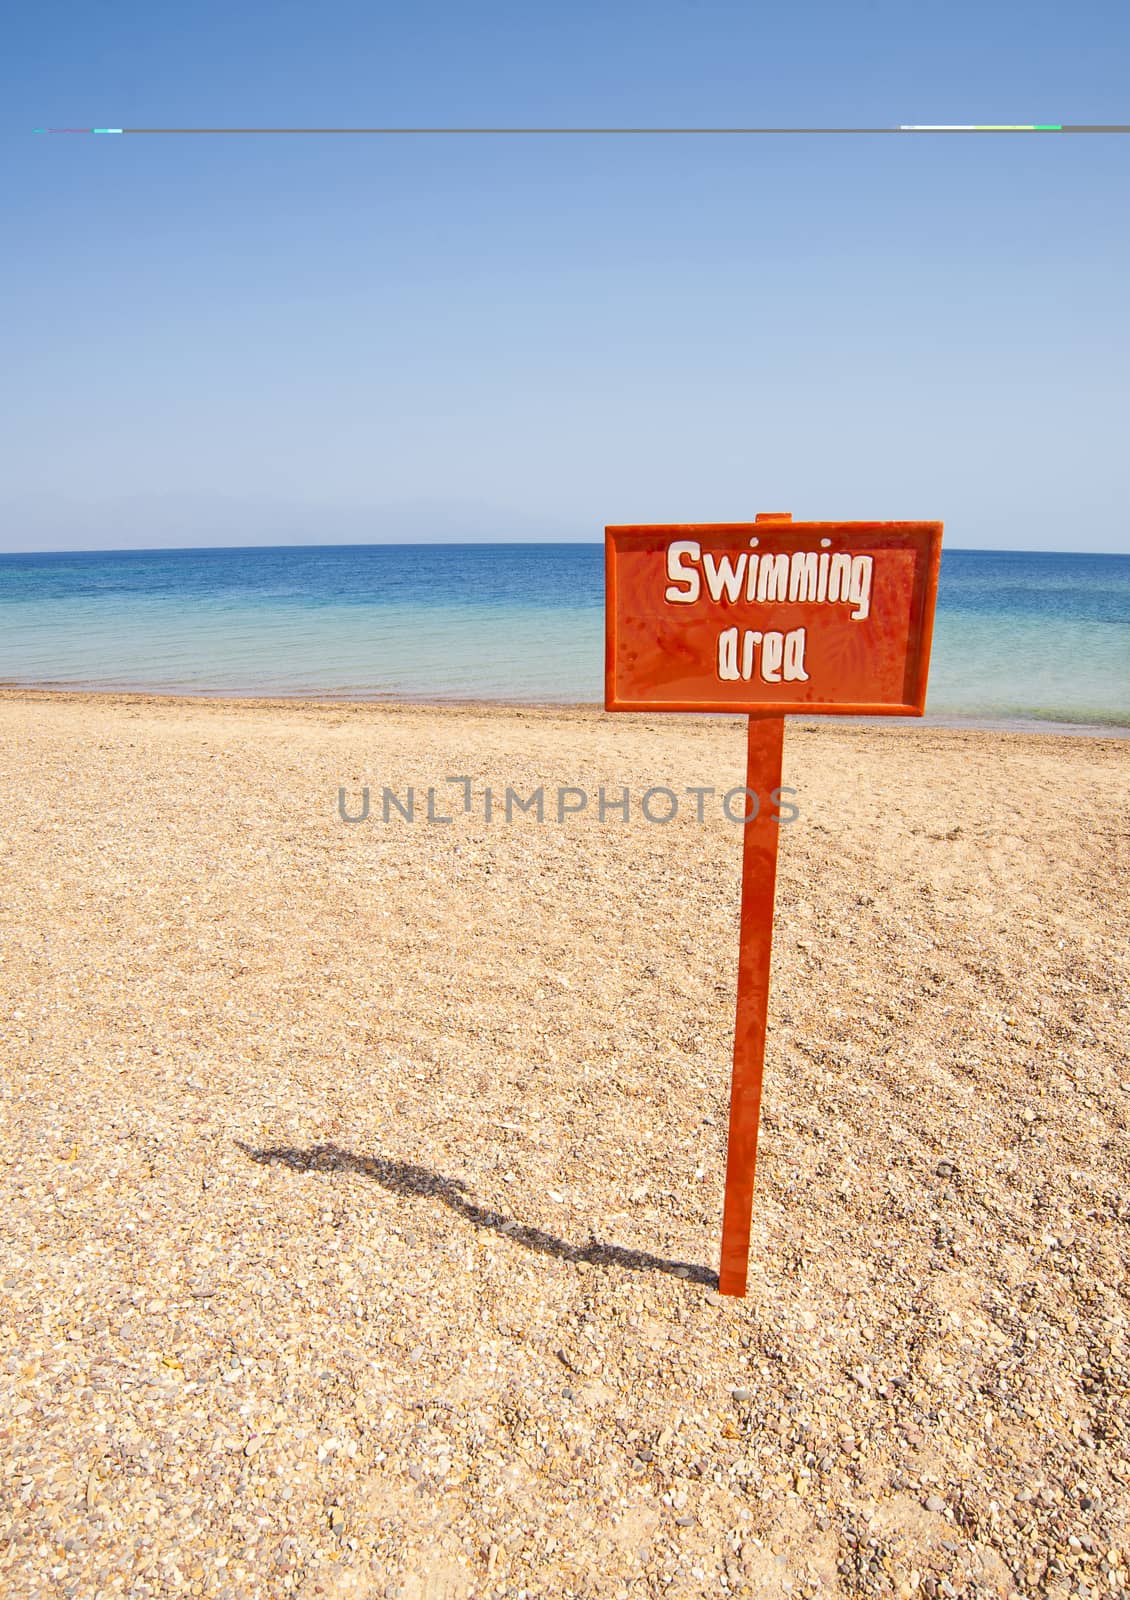 View out to sea from a tropical beach with a swimming area sign